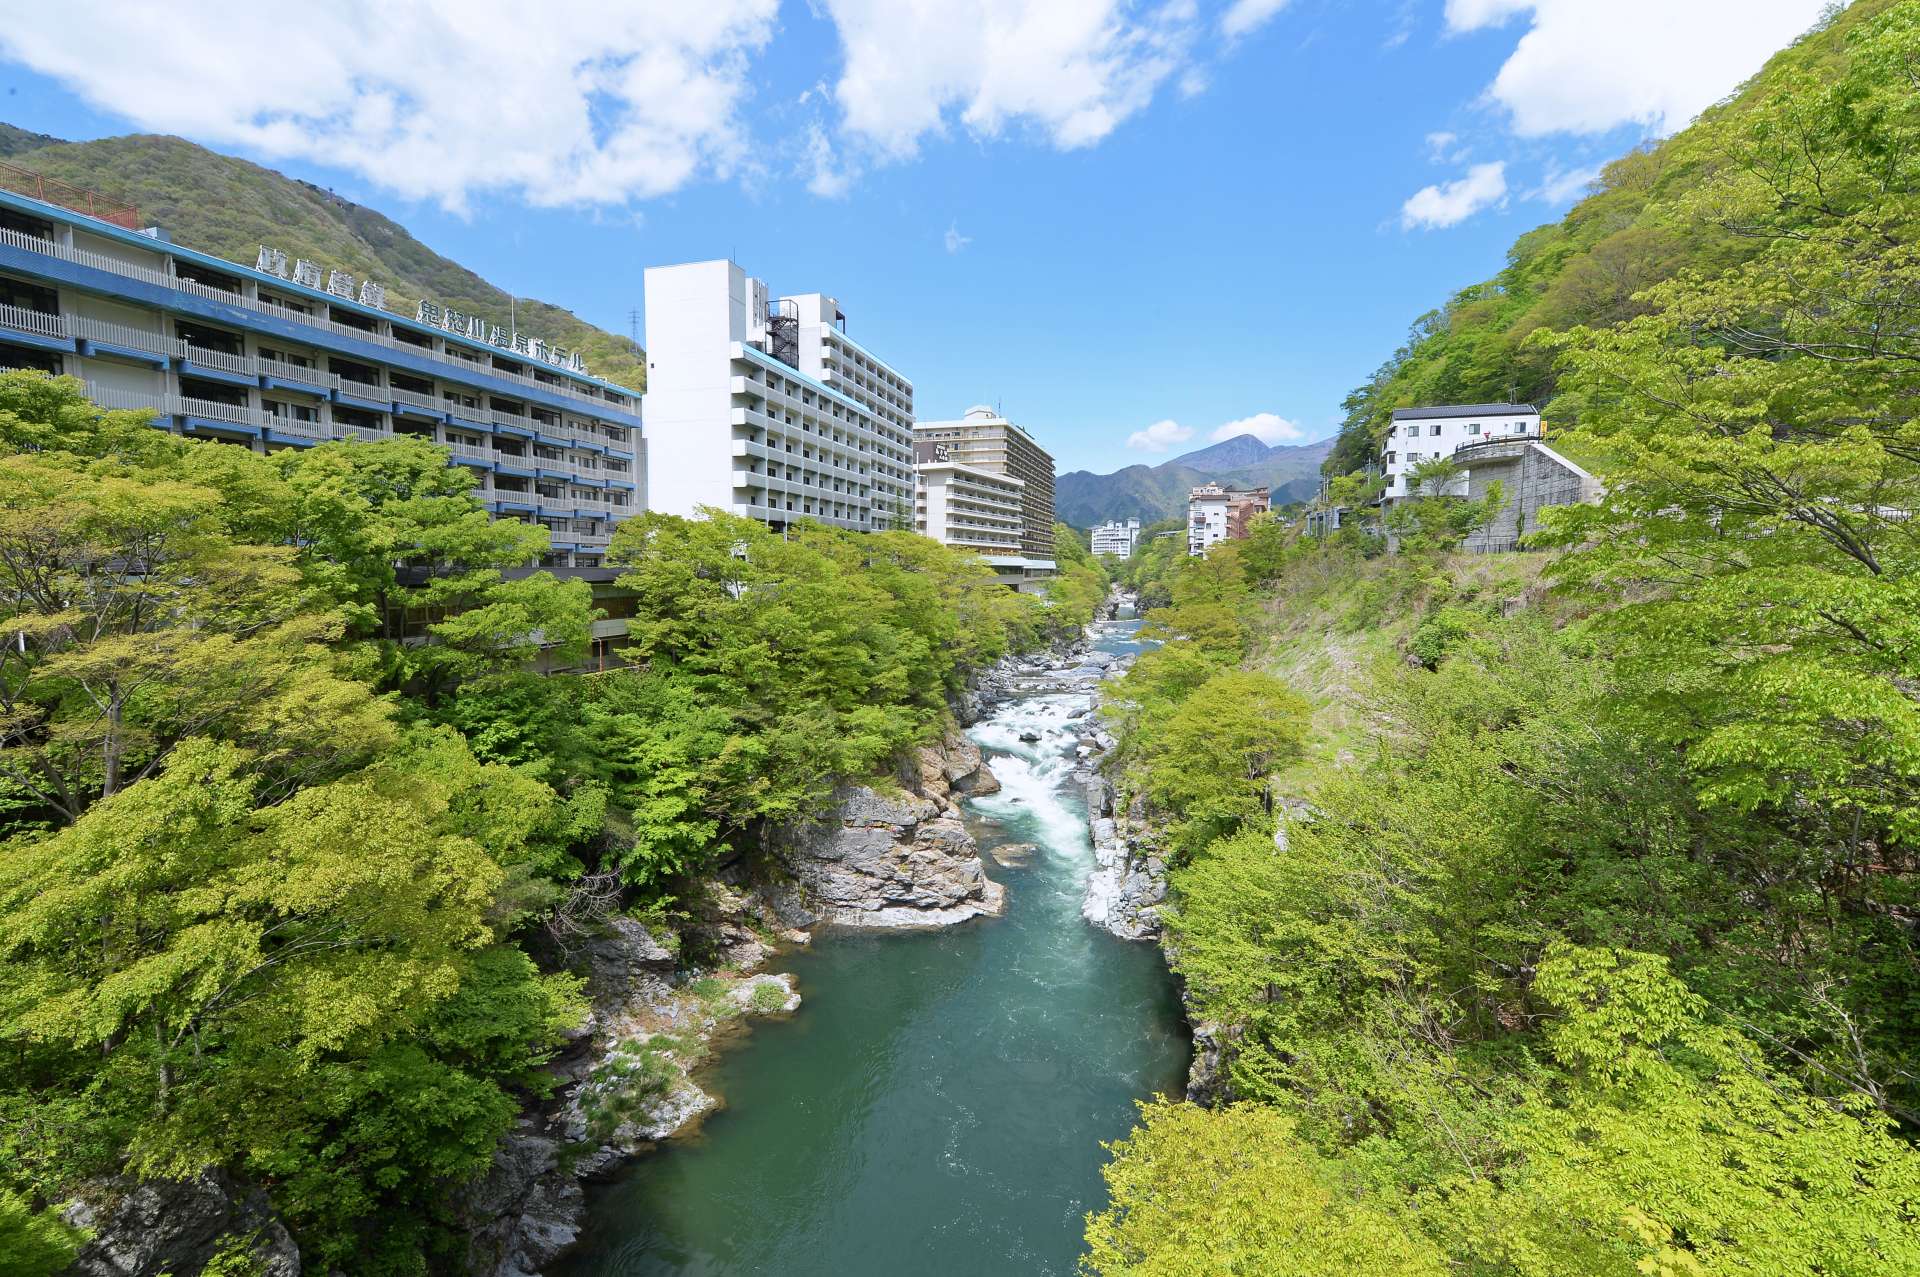 A hot spring resort where magnificent valley views await along historic, long-loved onsen.